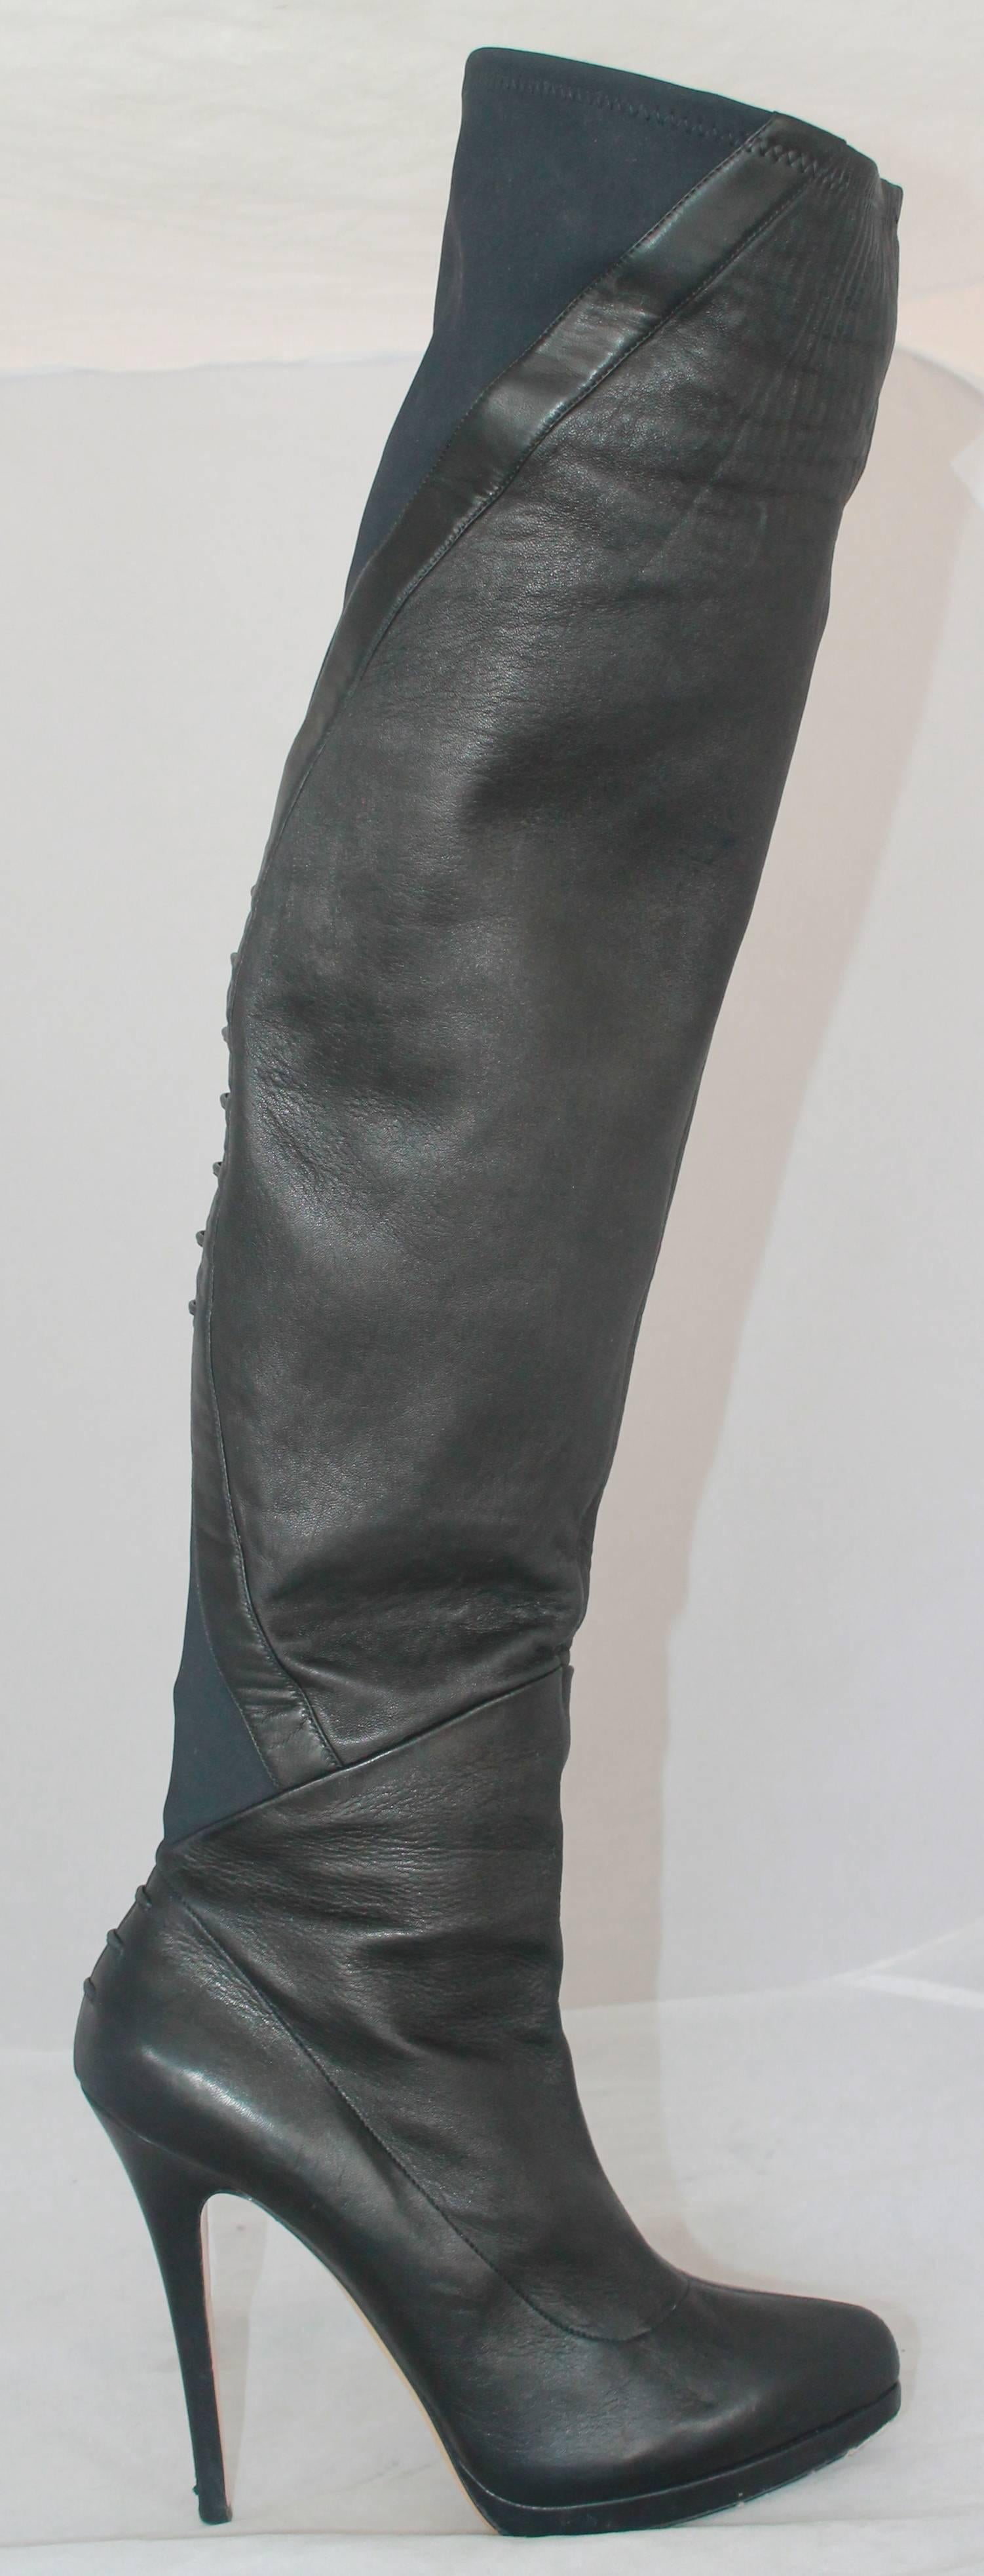 Casadei Black Leather and Neoprene Thigh-High Boots - 11

These boots are in good condition with noticeable wear on bottoms and heel. They are leather with neoprene on the back of the upper calf. 

Measurements:

Heel - 5.5"
Length -